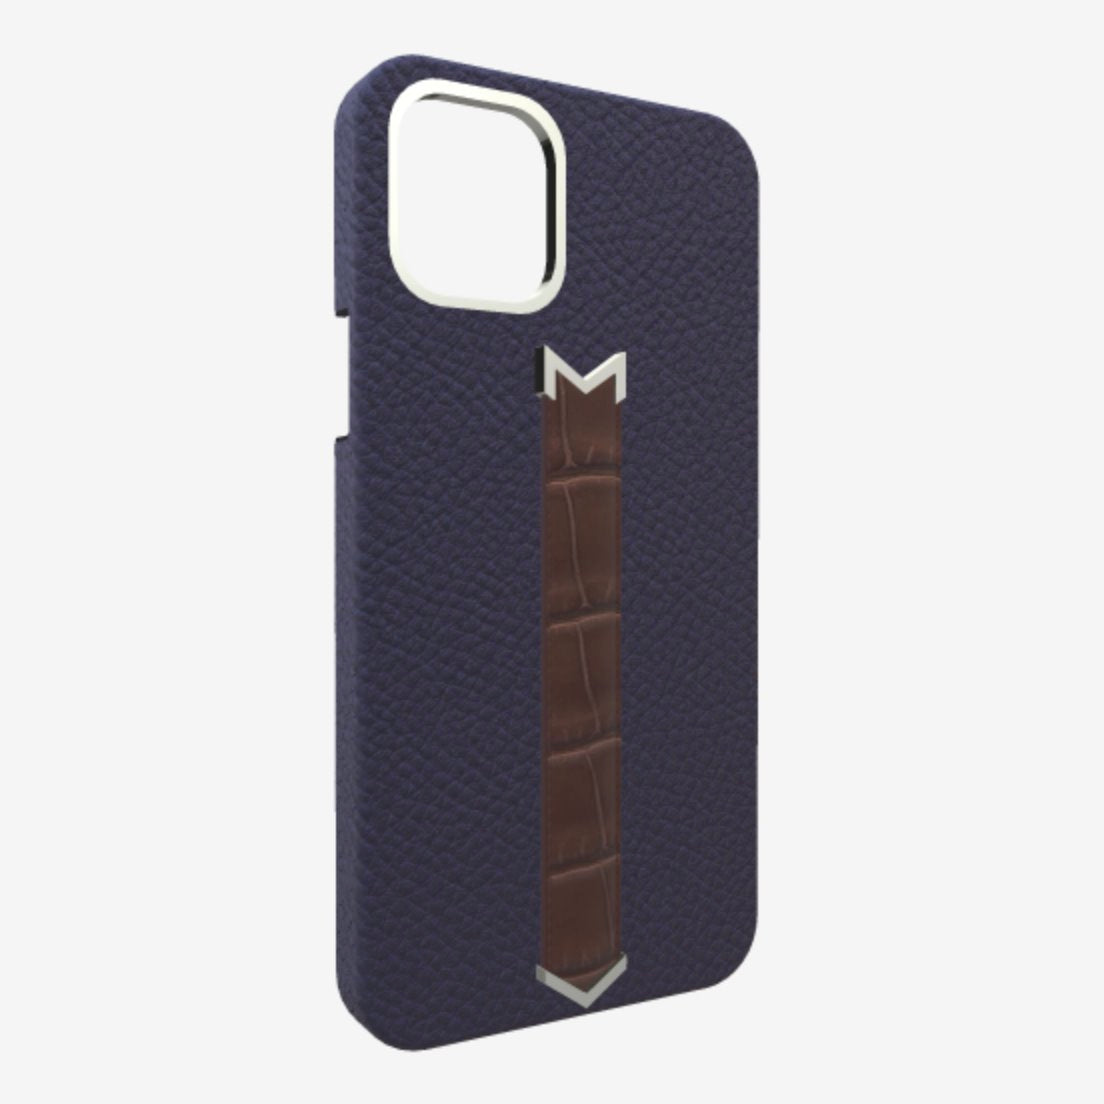 Silver Finger Strap Case for iPhone 13 Pro Max in Genuine Calfskin and Alligator Navy-Blue Borsalino-Brown 